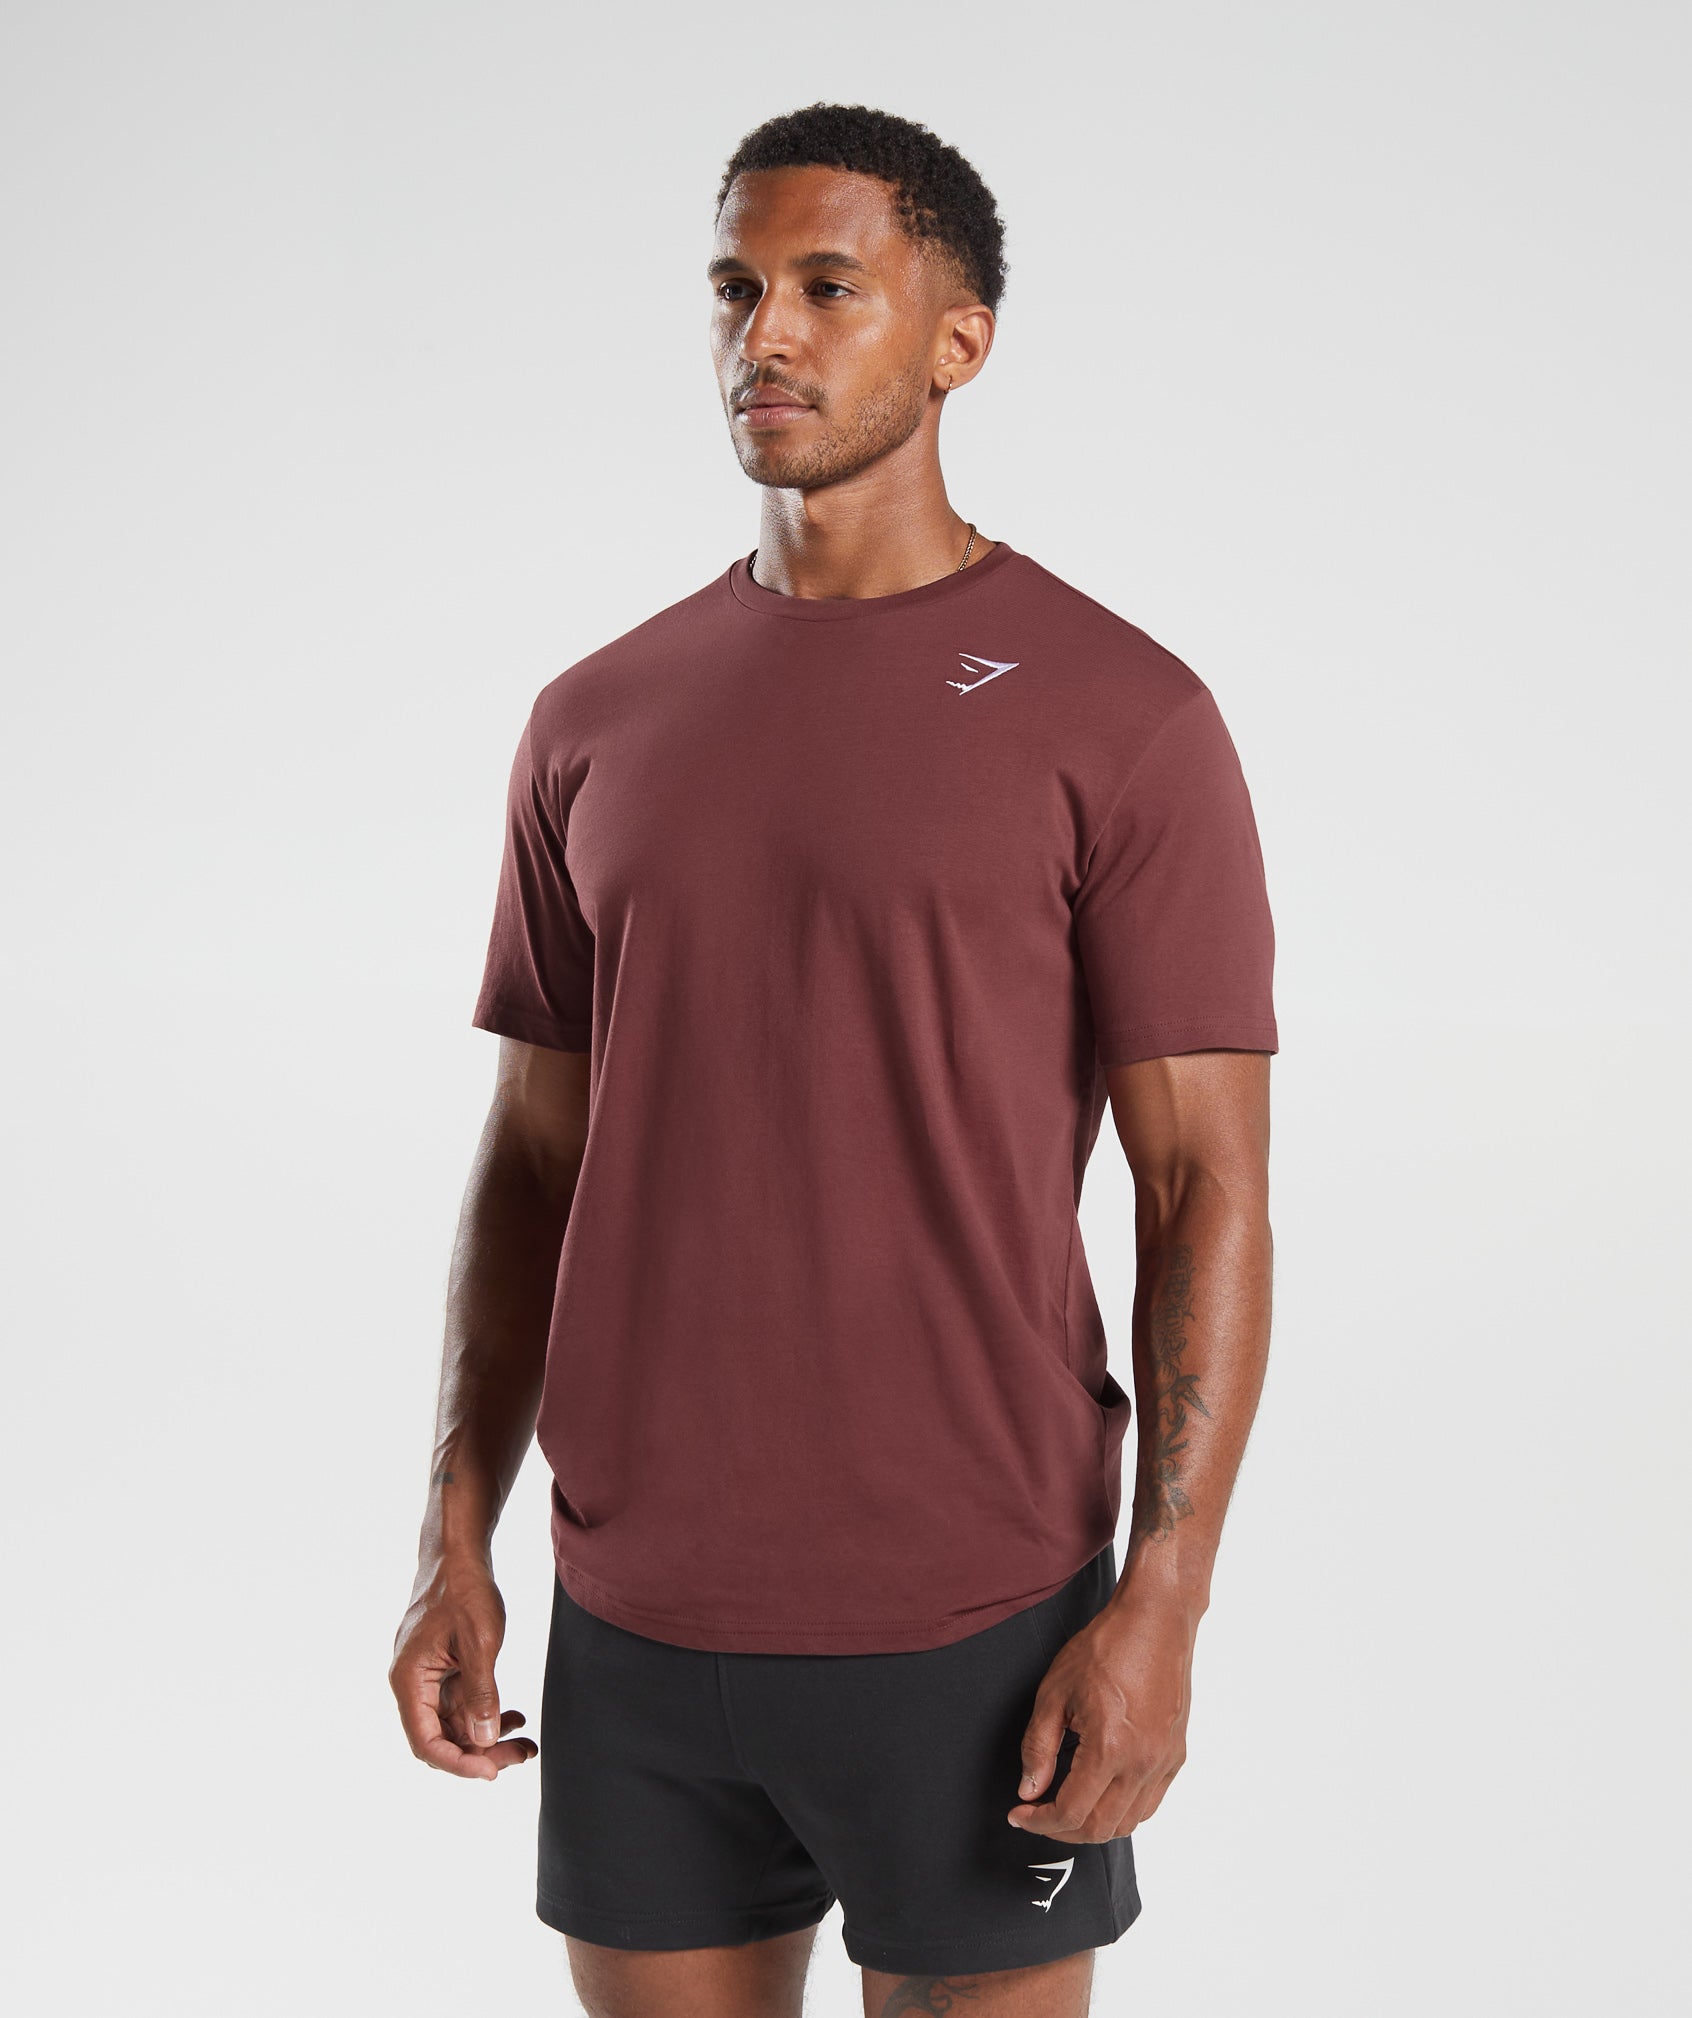 Crest T-Shirt in Washed Burgundy - view 3